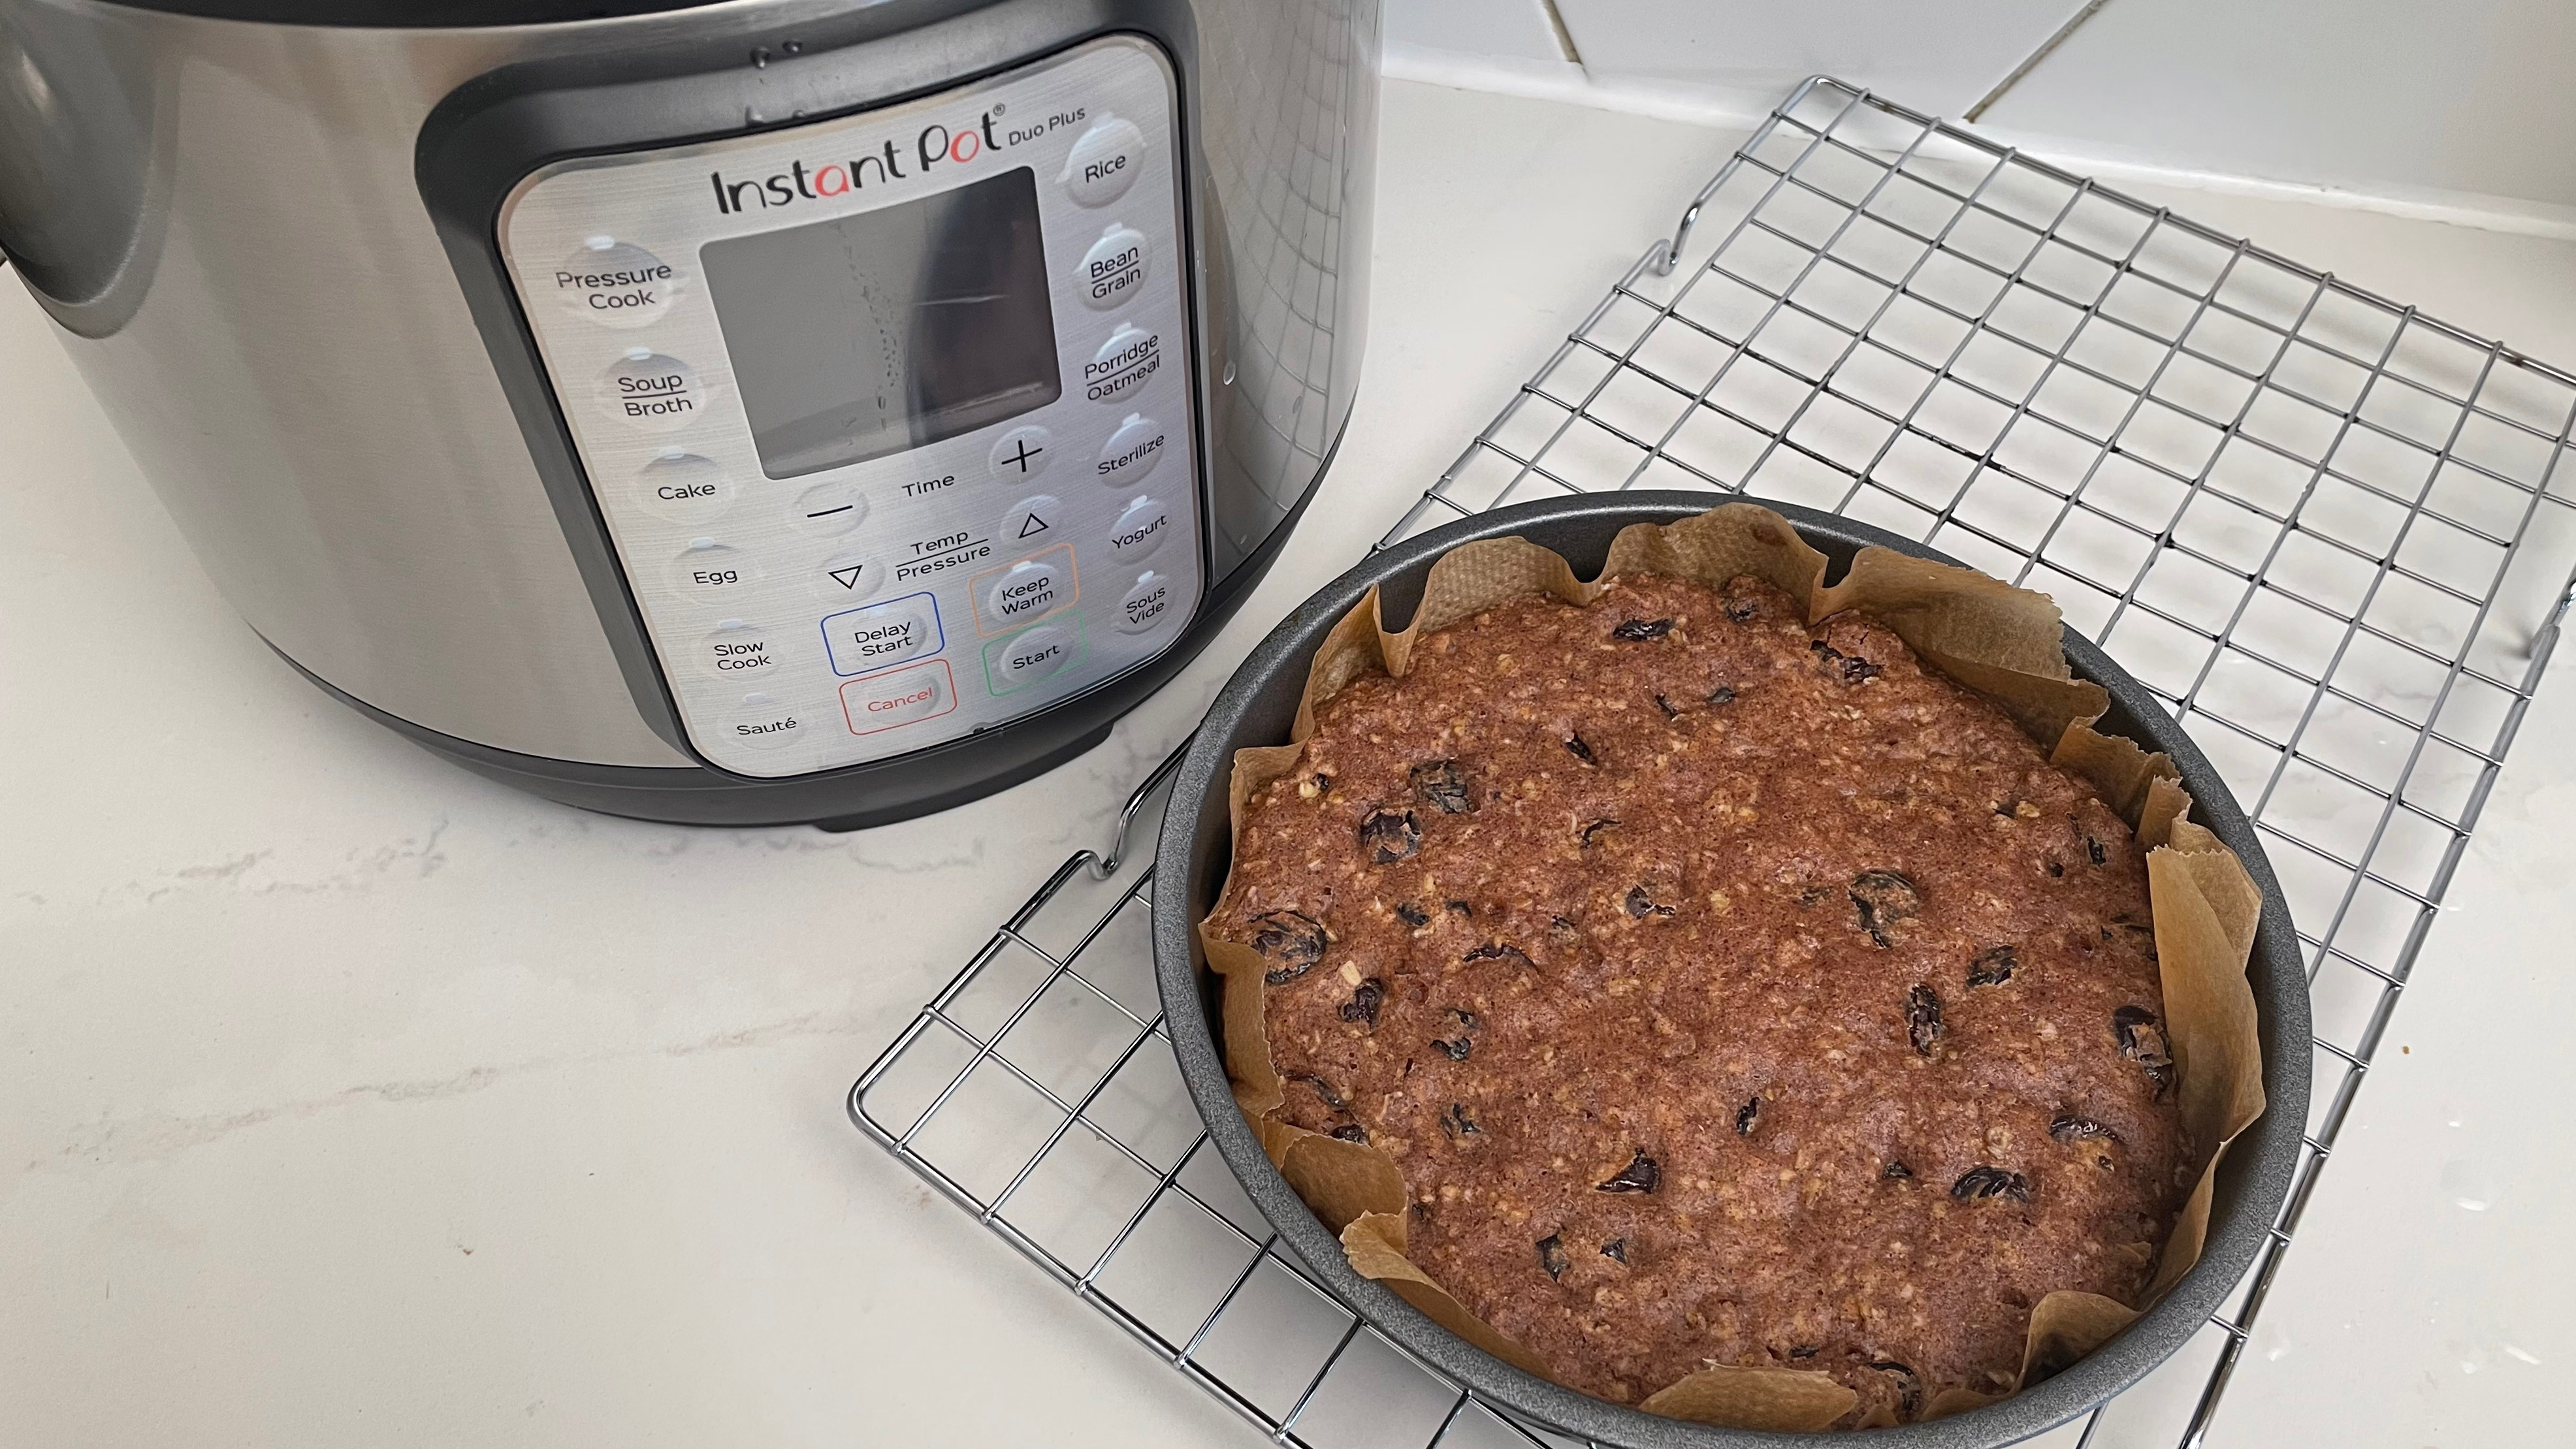 A cookie baked in an Instant Pot